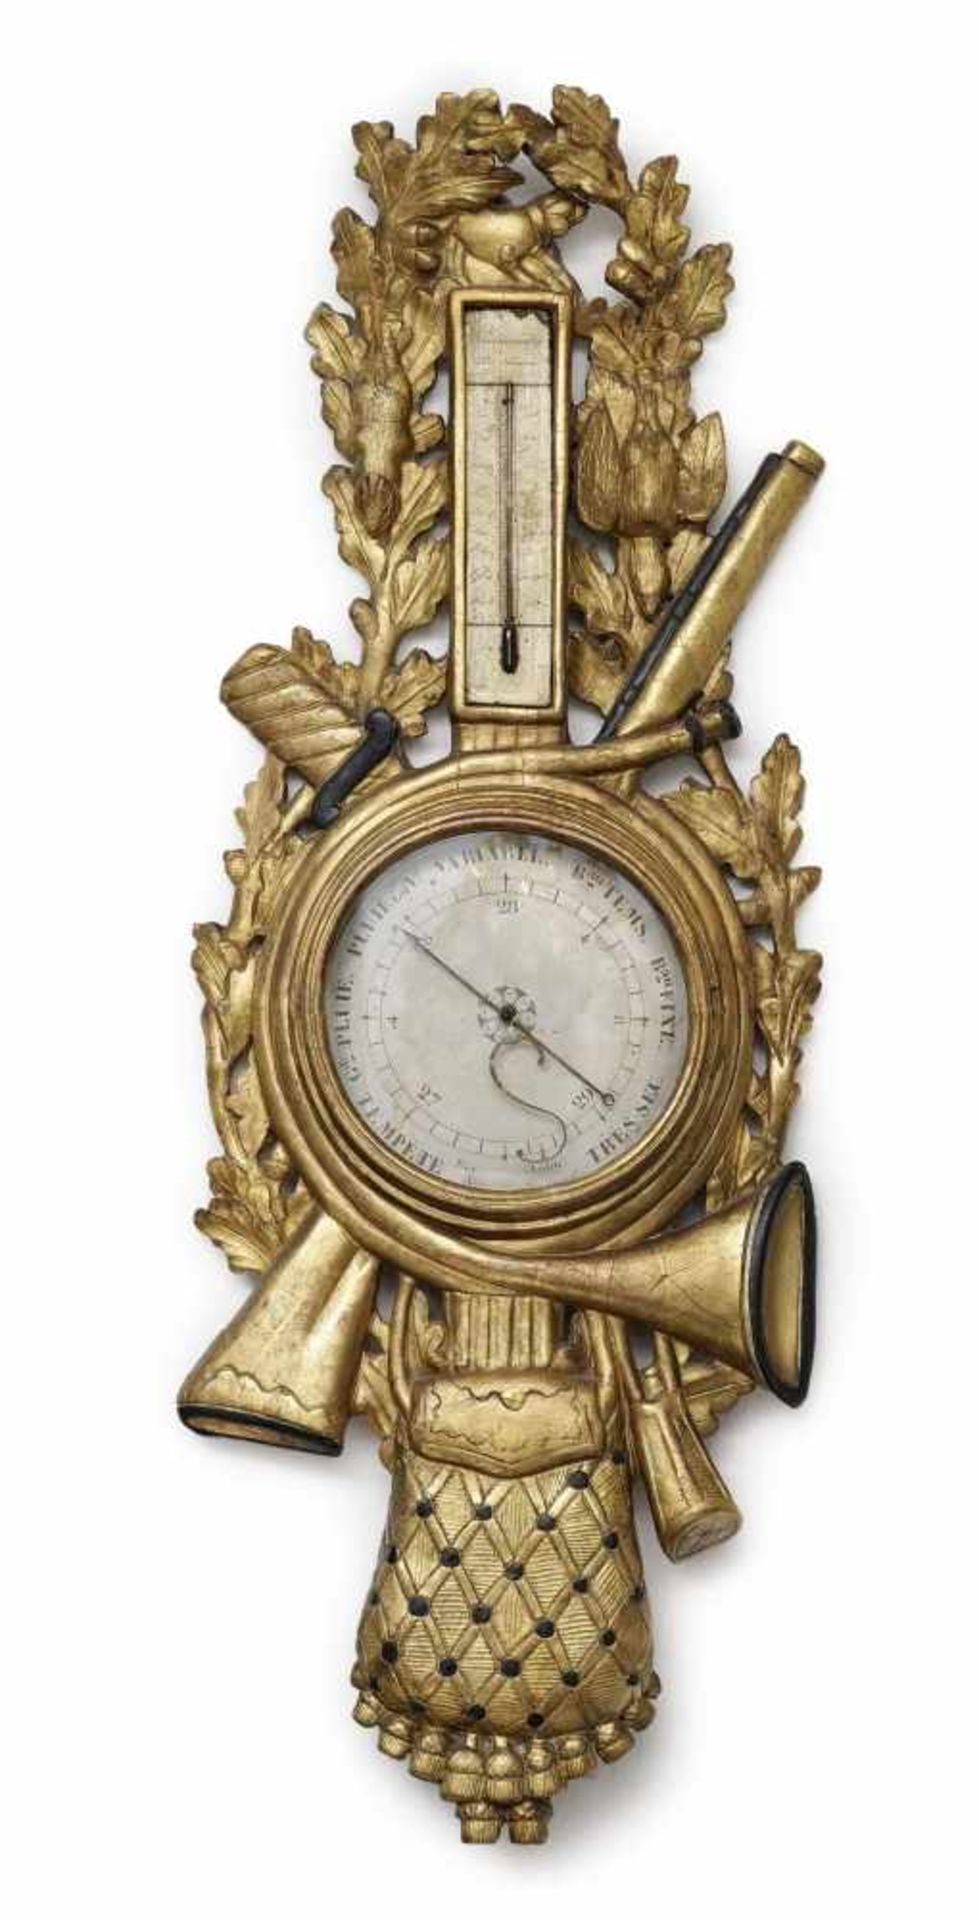 A barometerFrance (Paris), late 18th century With thermometer. Wood, carved, painted in gold.